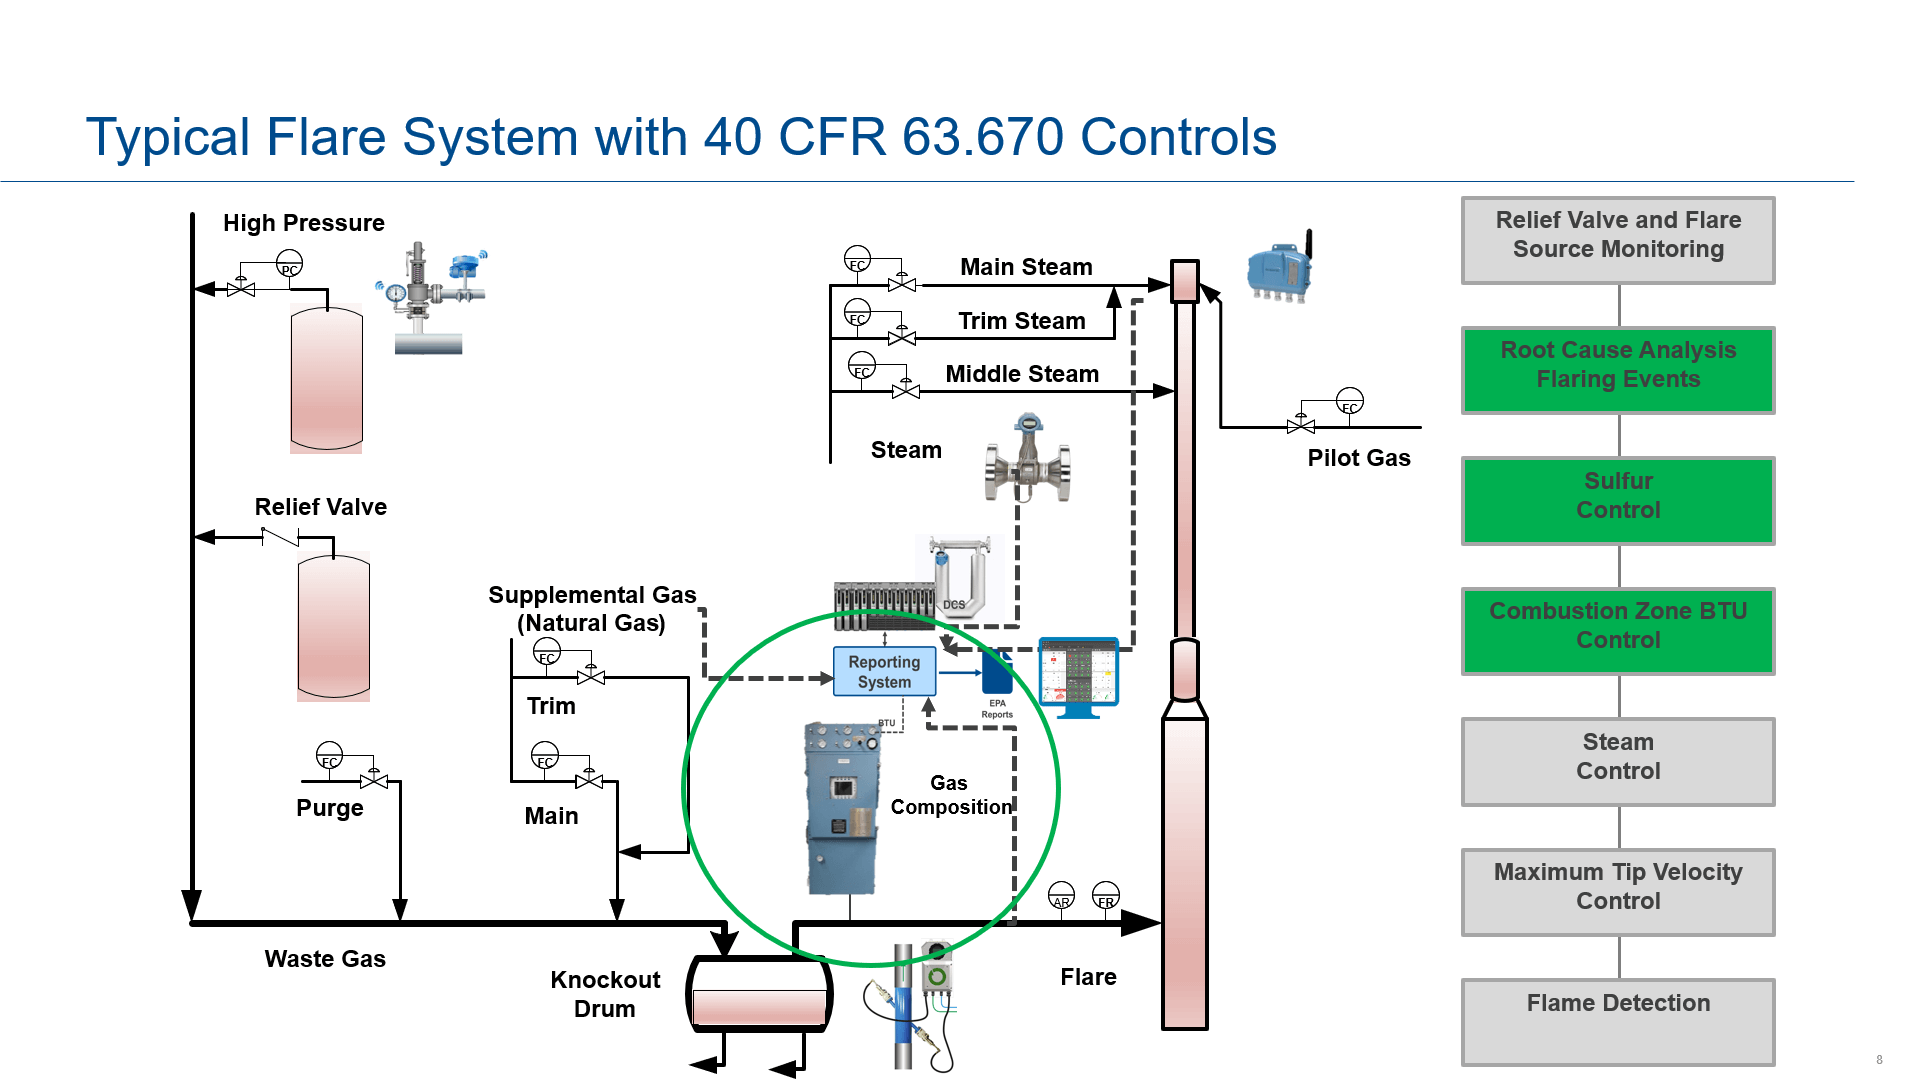 Typical flare system for 40 CFR 63.670 reporting